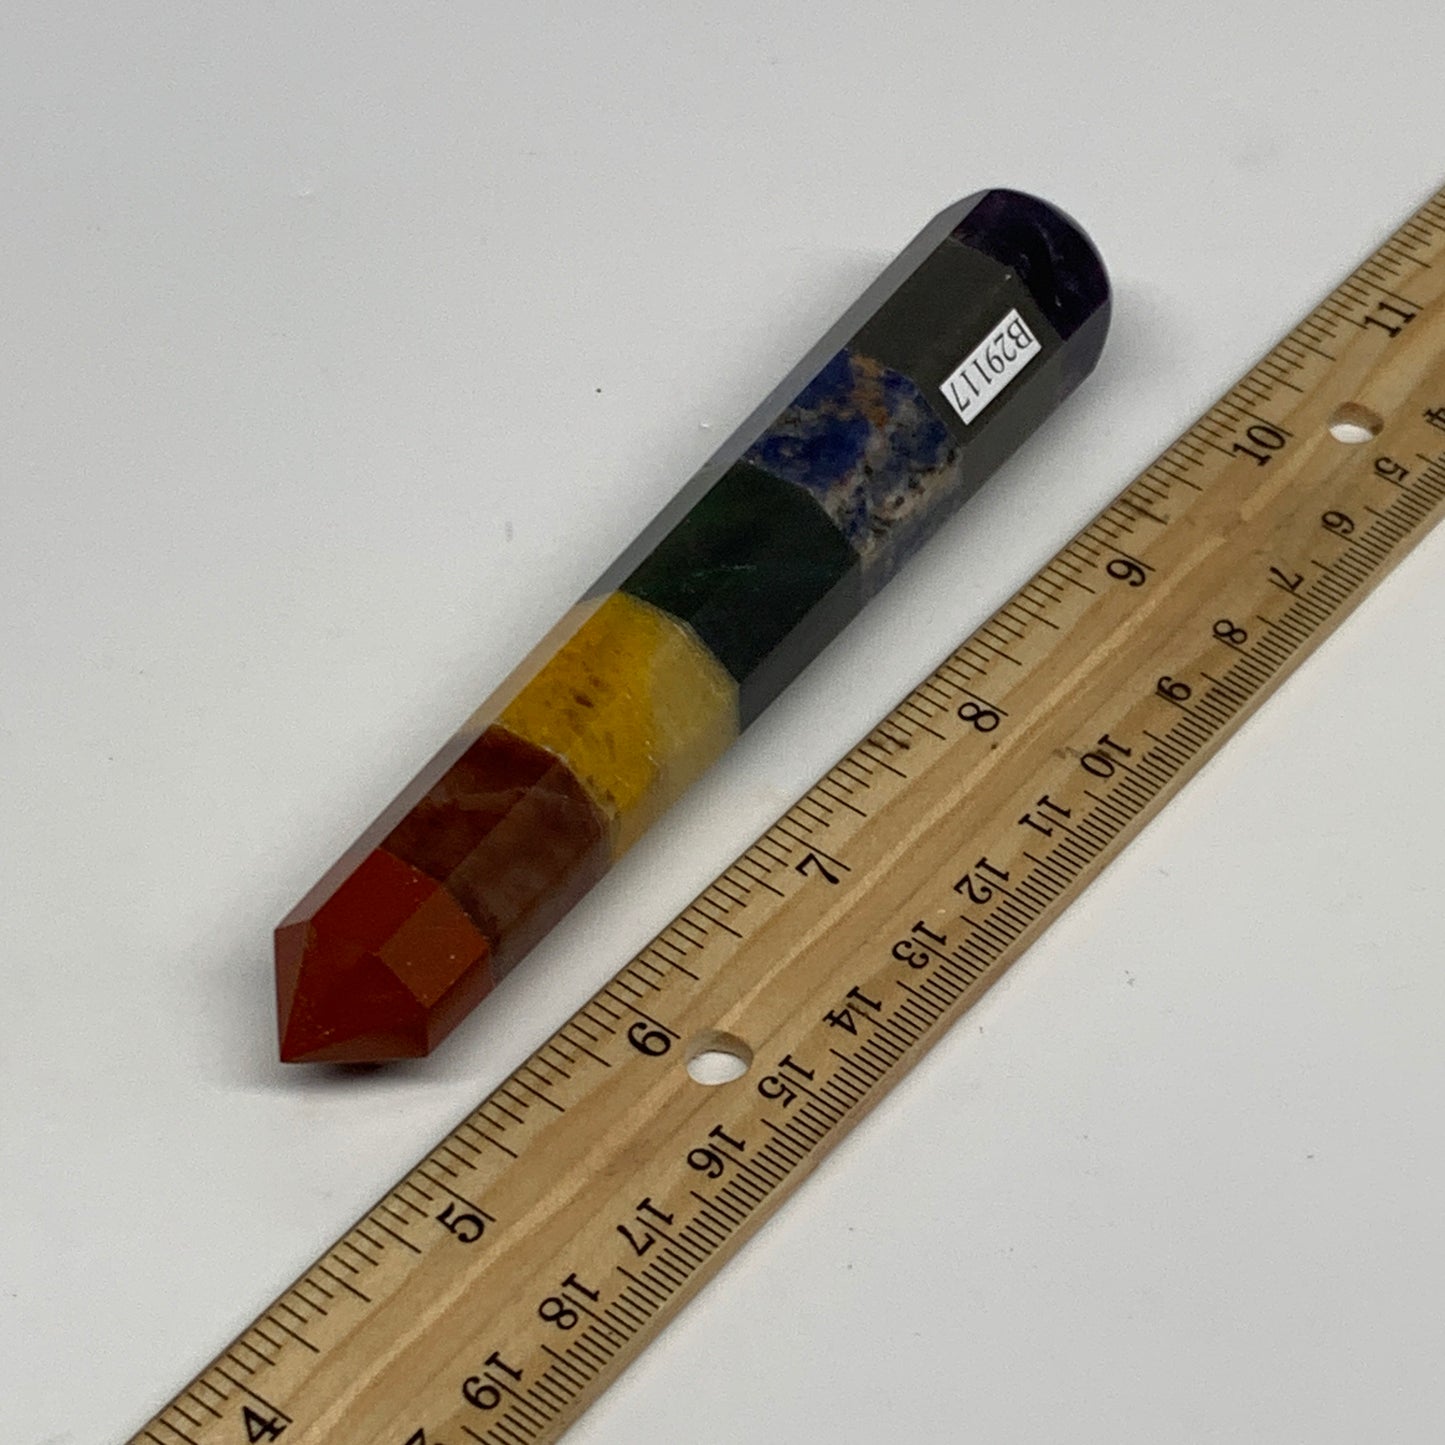 98.6g, 5.1"x0.9", 7 Chakra Point Wand Obelisk Point Crystal from India, B29117